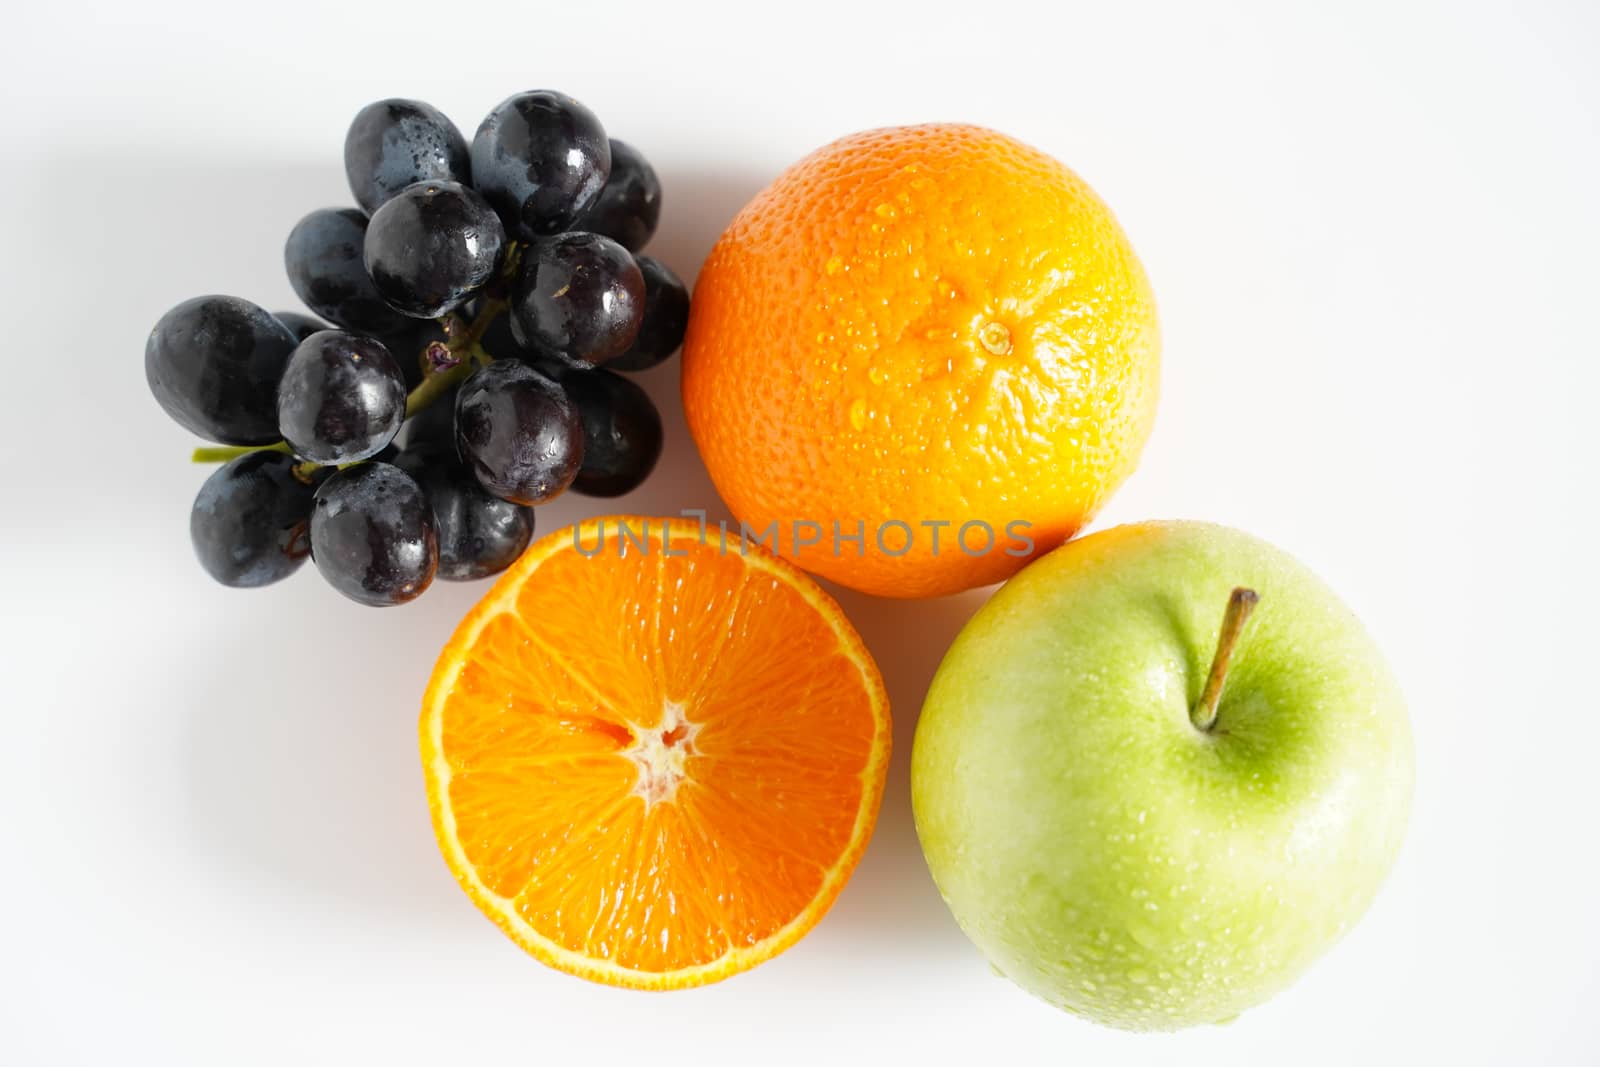 A granny smith green apple, some black grapes and an orange against a plain whit background